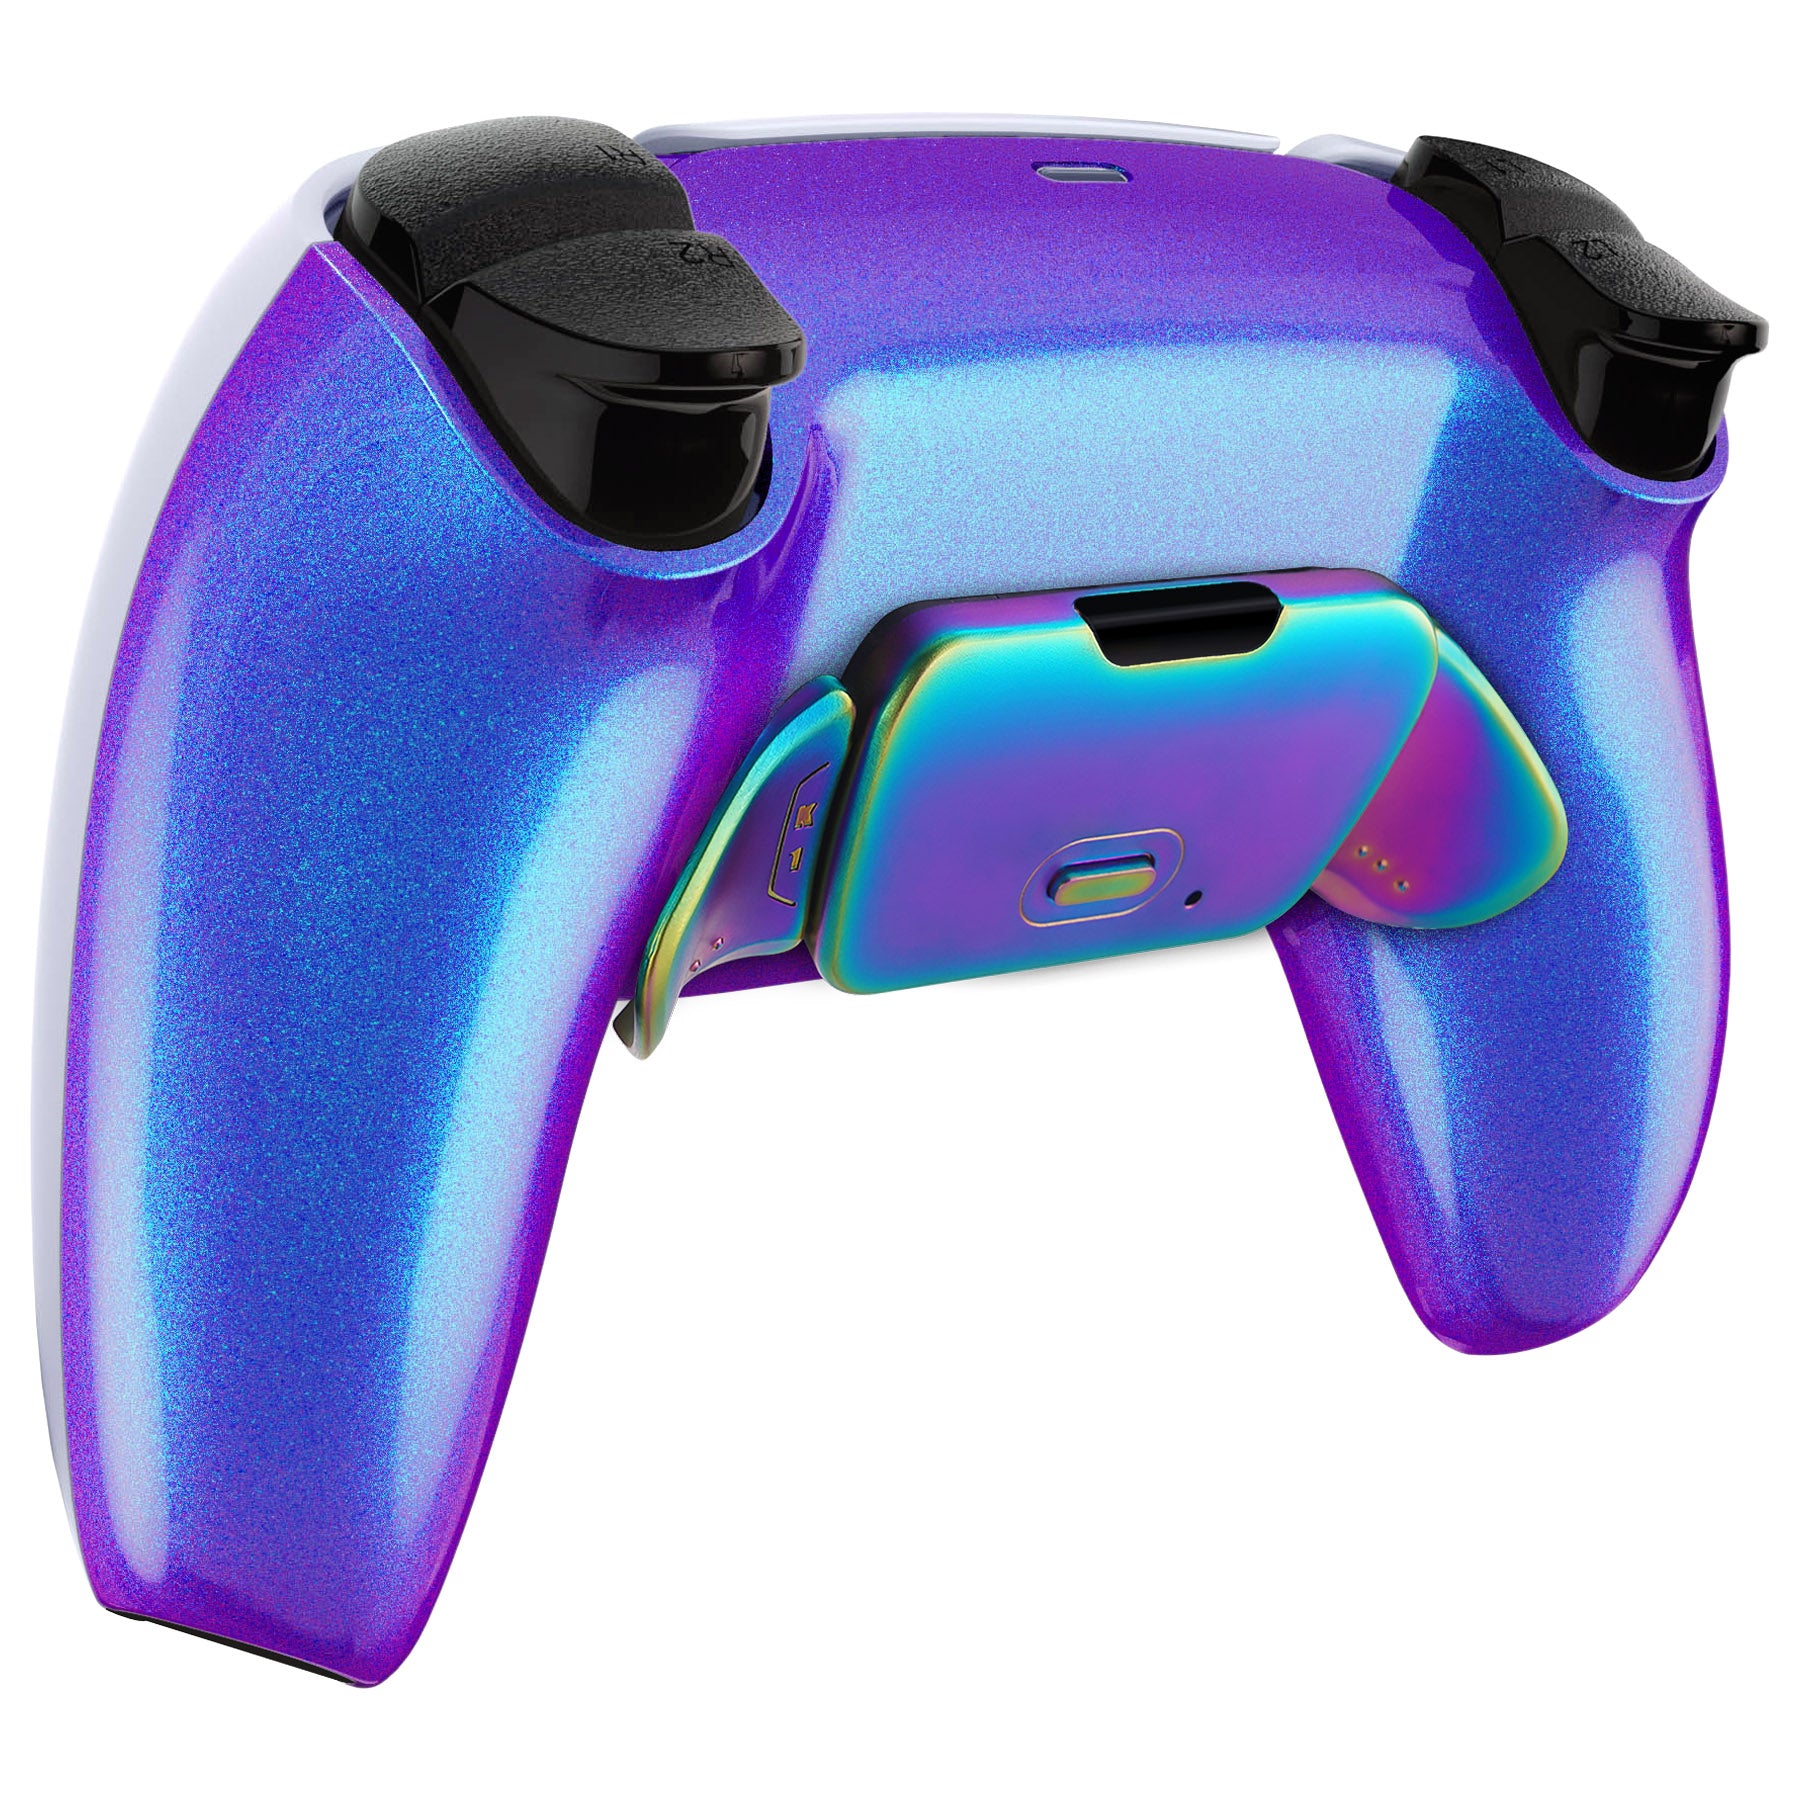 eXtremeRate Real Metal Buttons (RMB) Version RISE 2.0 Remap Kit for PS5 Controller BDM-010/020 - Chameleon Purple Blue - Rainbow Aura Blue & Purple eXtremeRate